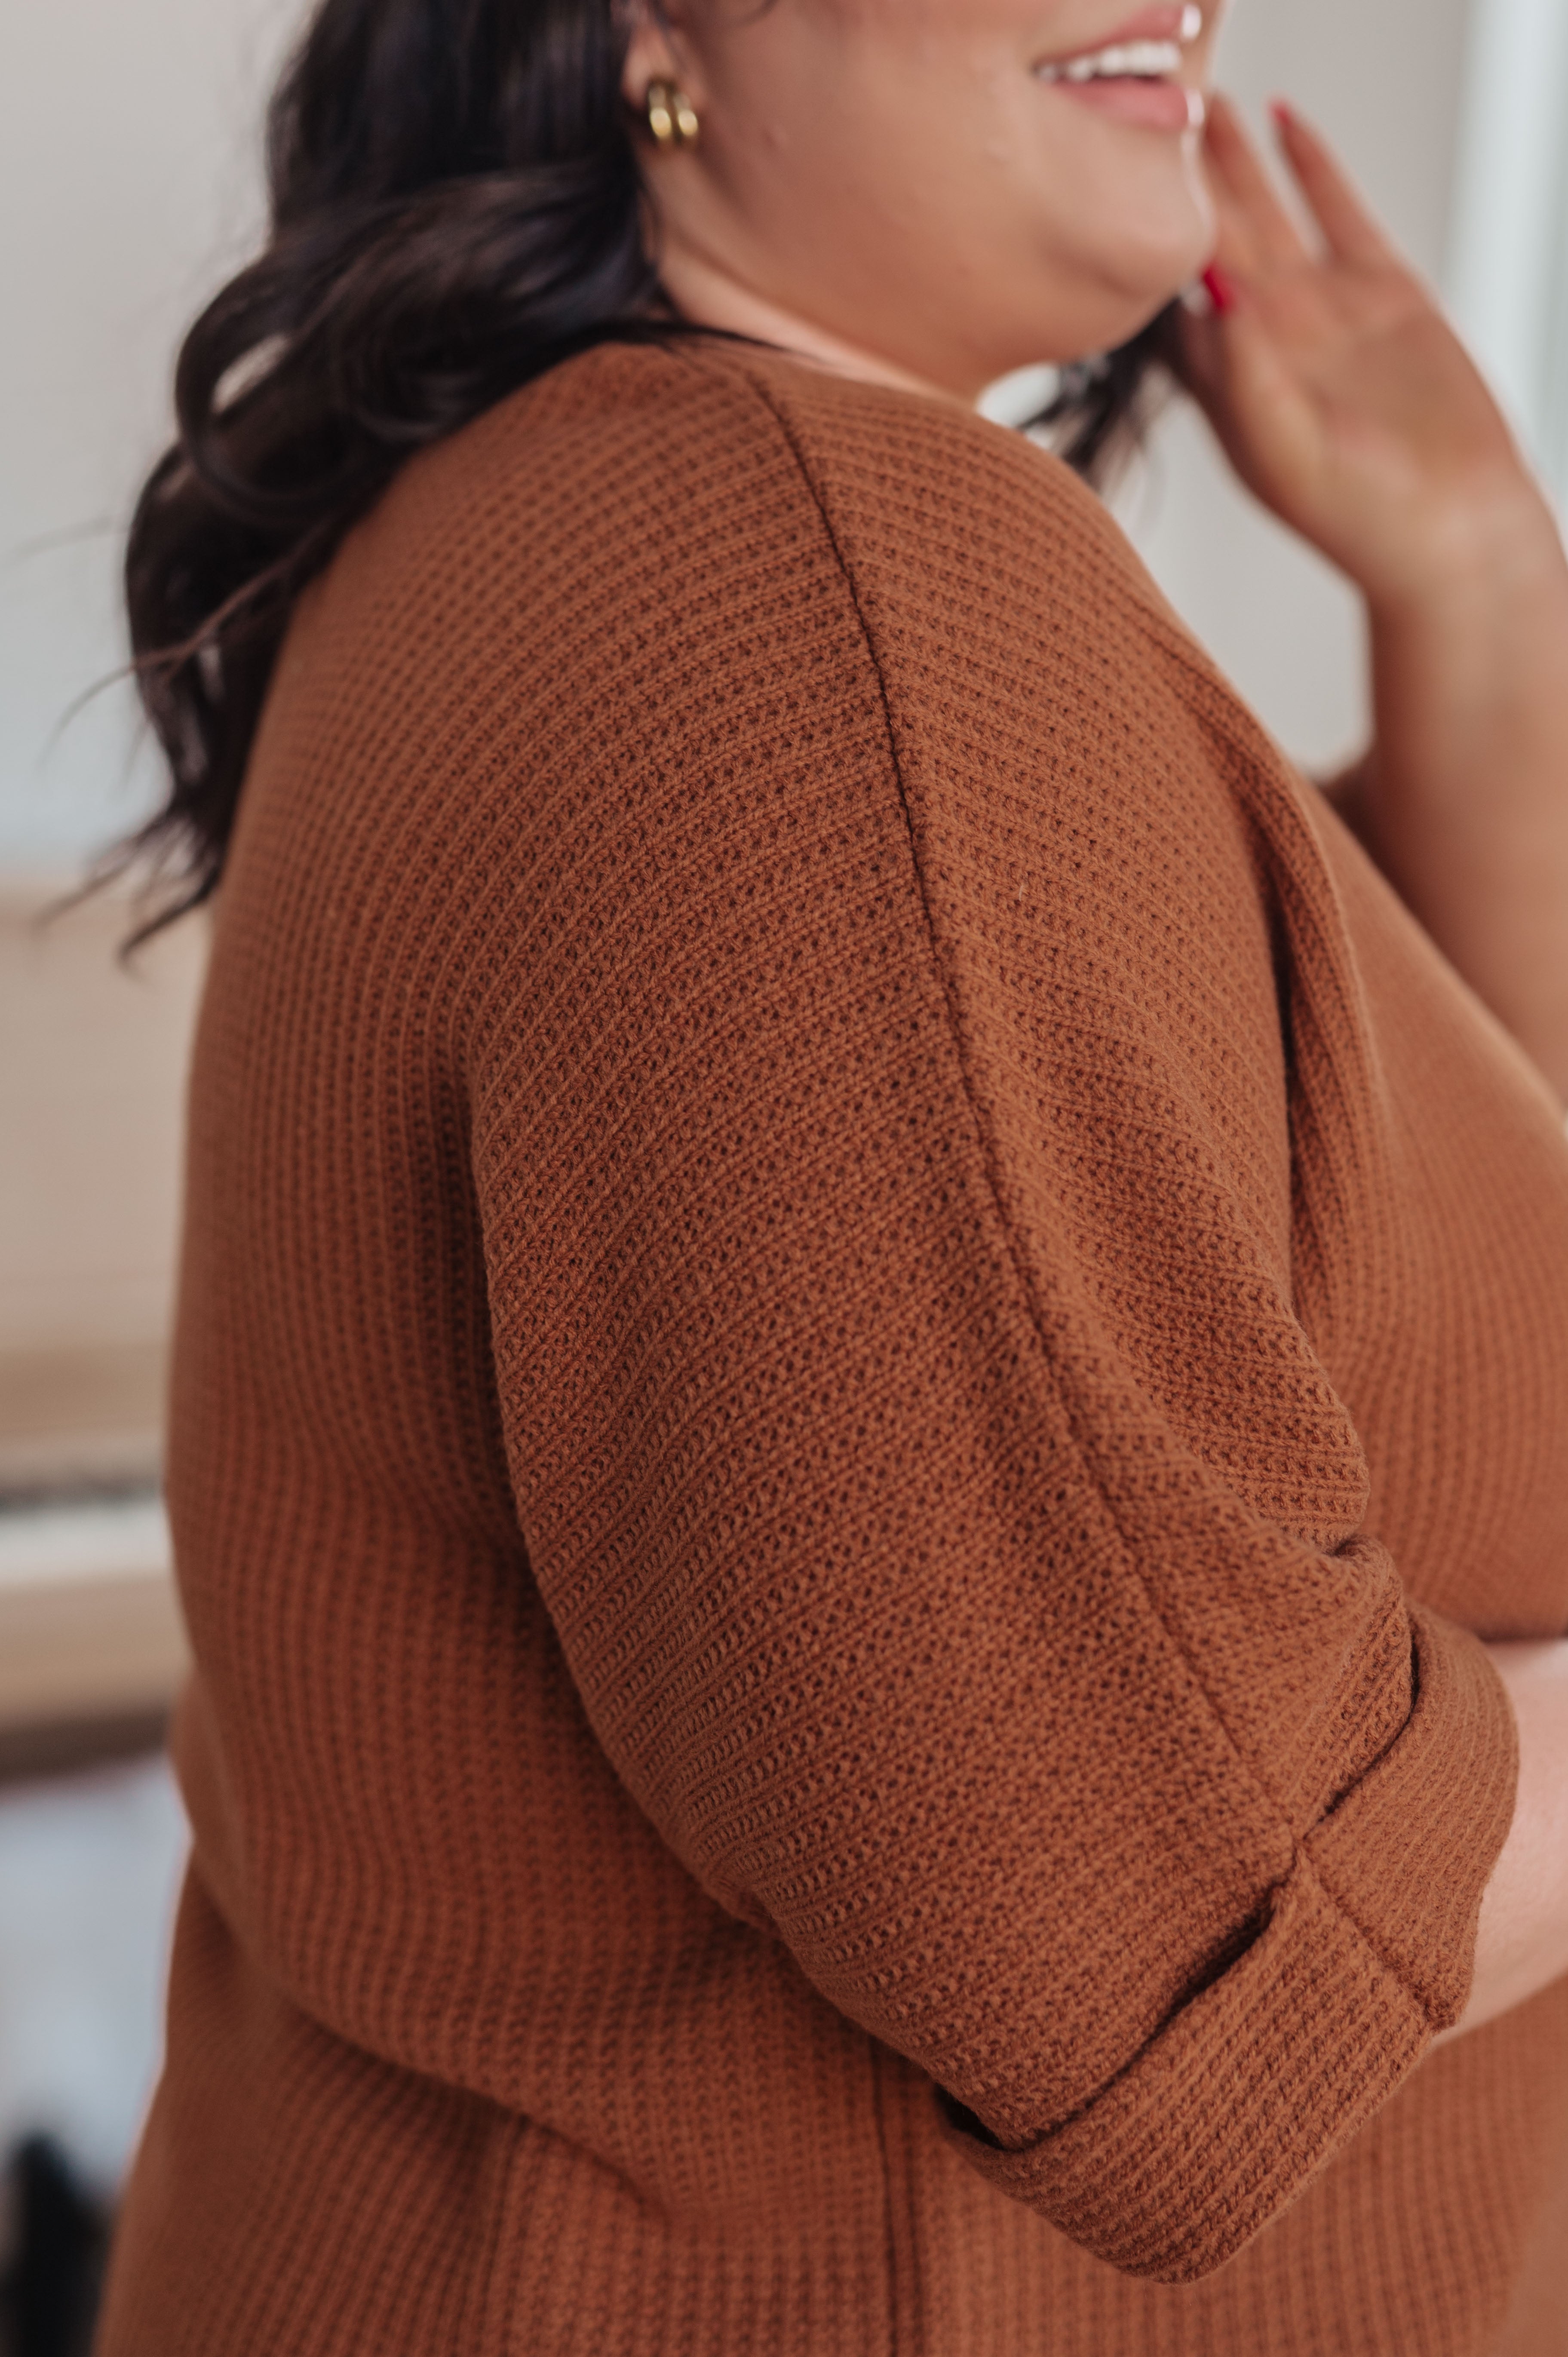 Lotta Love Knitted Sweater Top • Rust